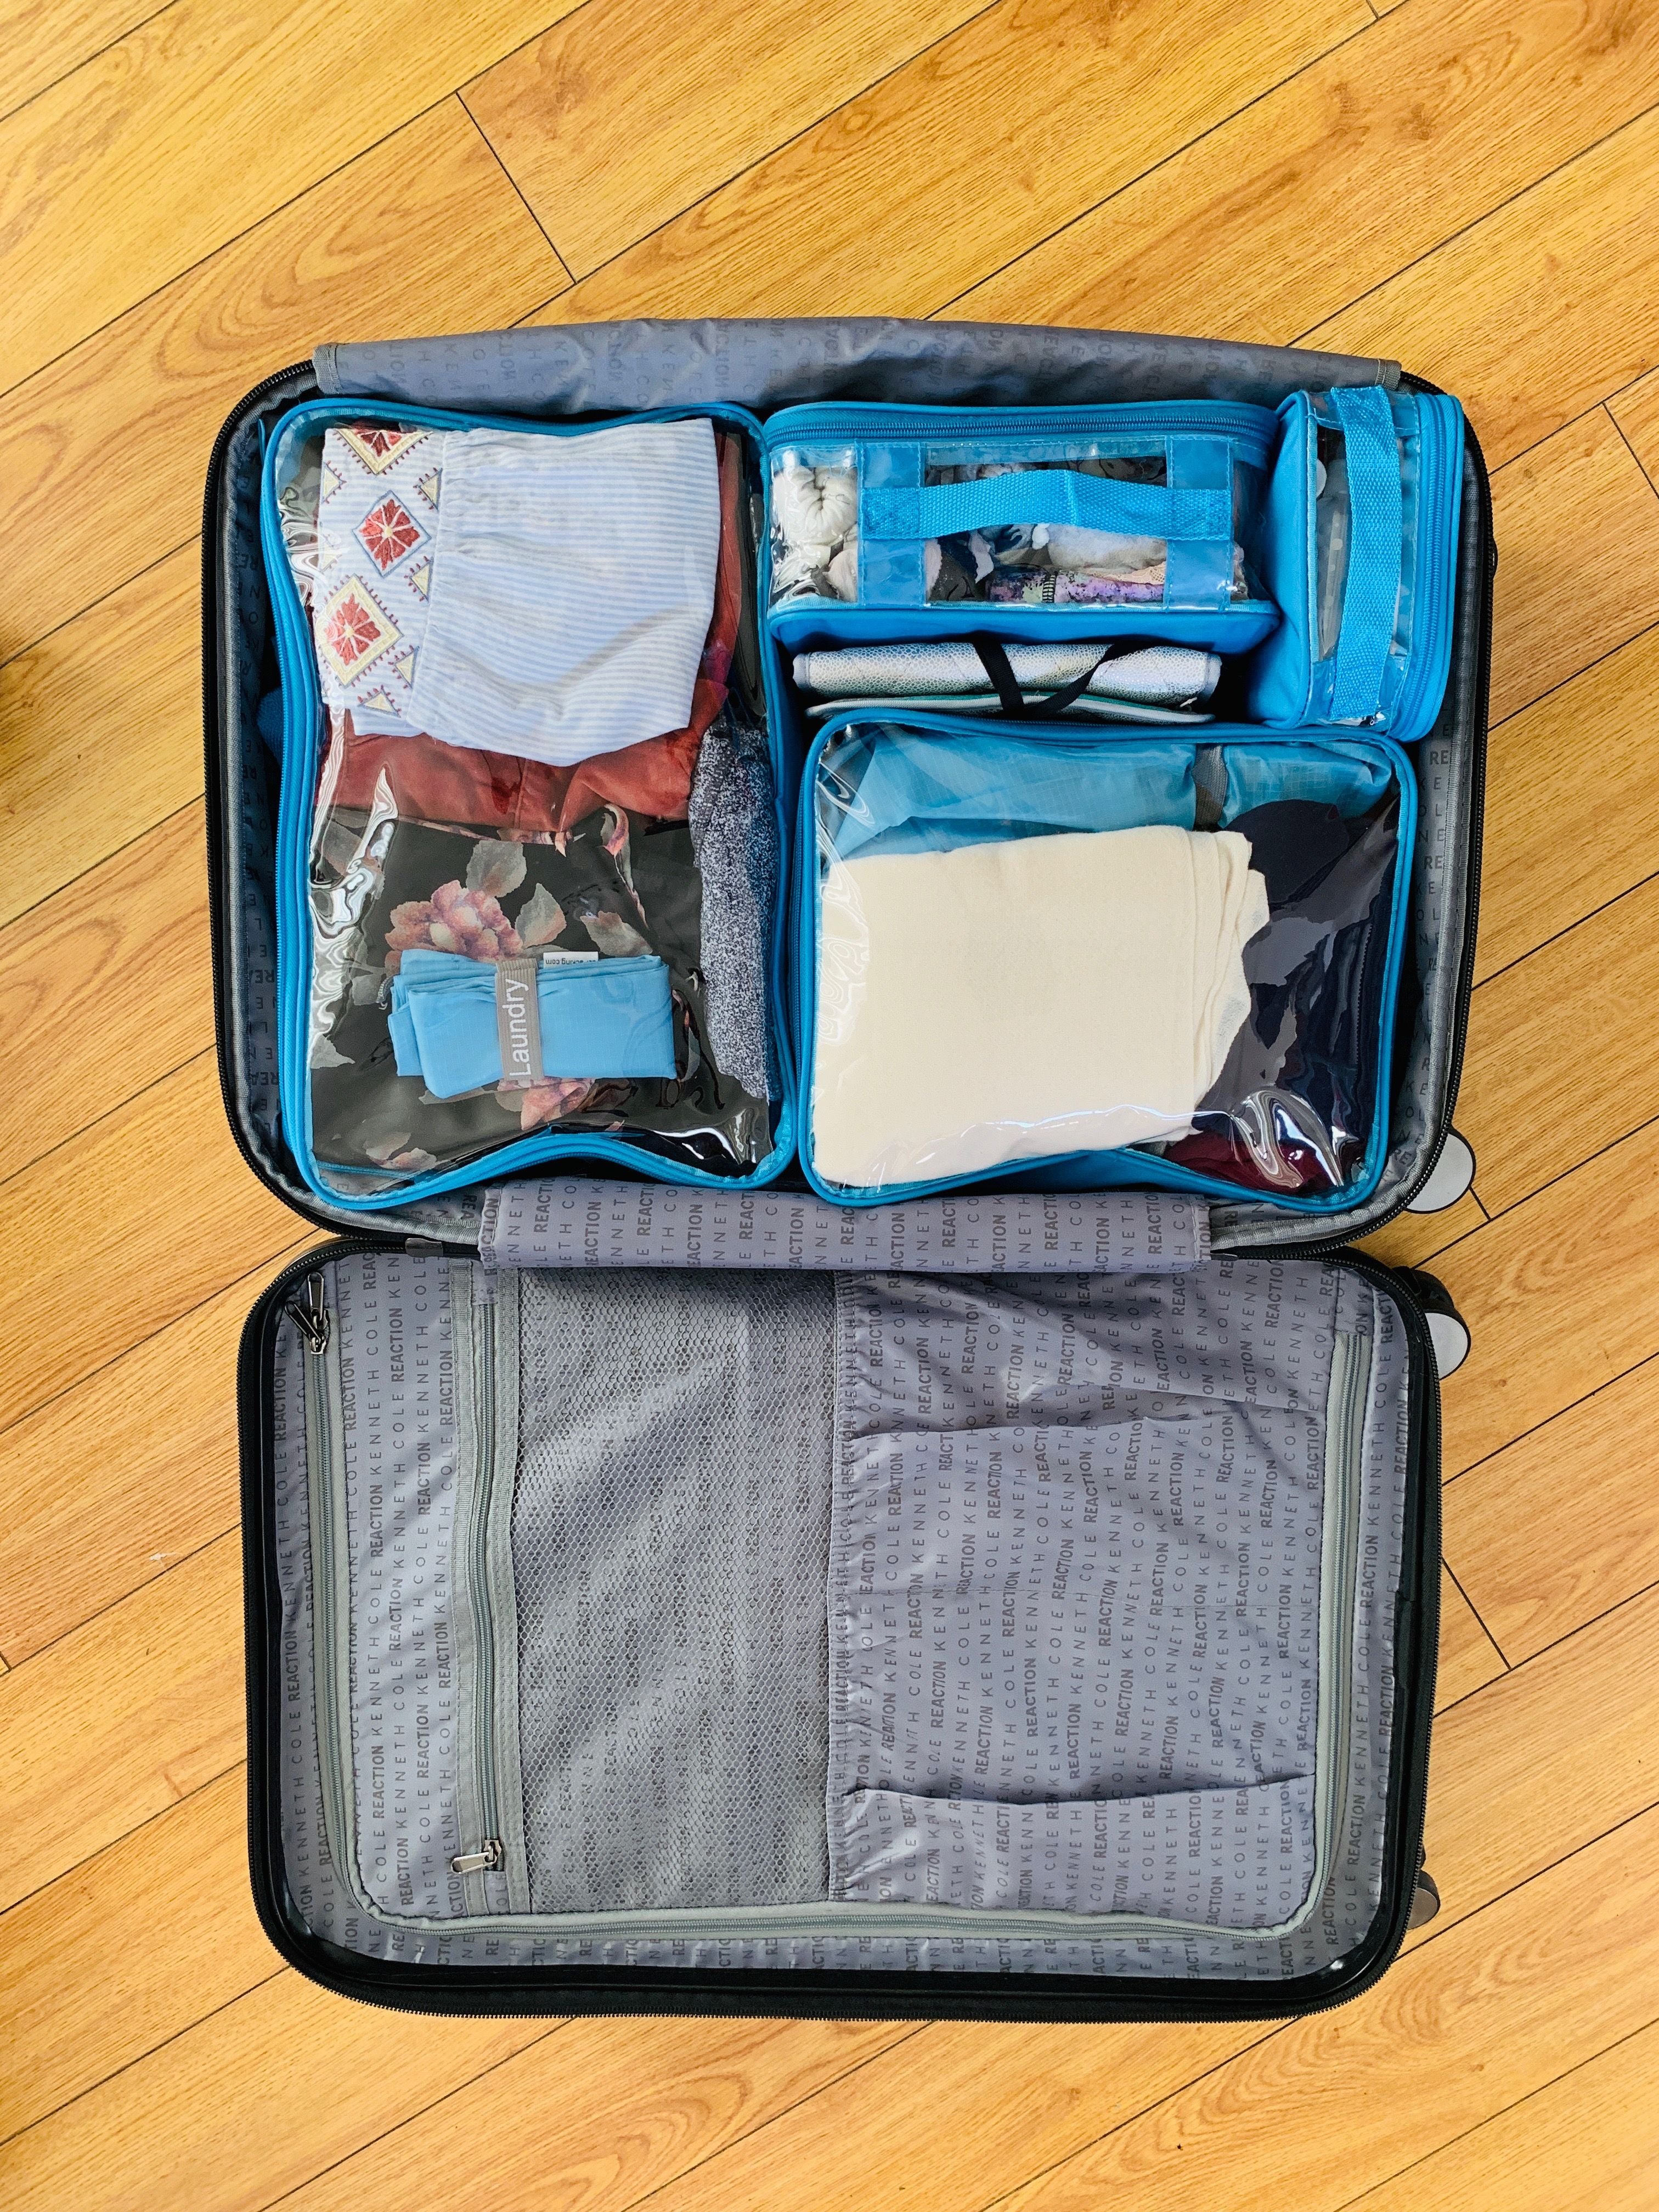 Turquoise Starter Set in a carry-on suitcase